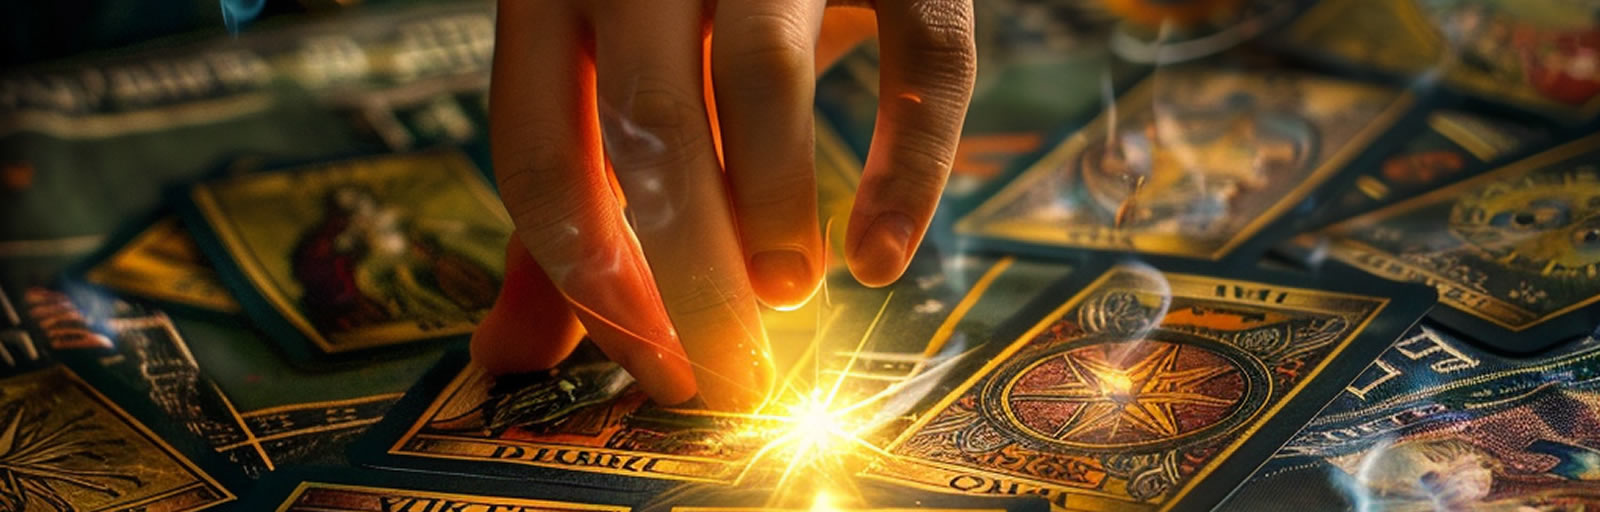 Featured image for “The Power of Tarot Cards as Psychic Tools”